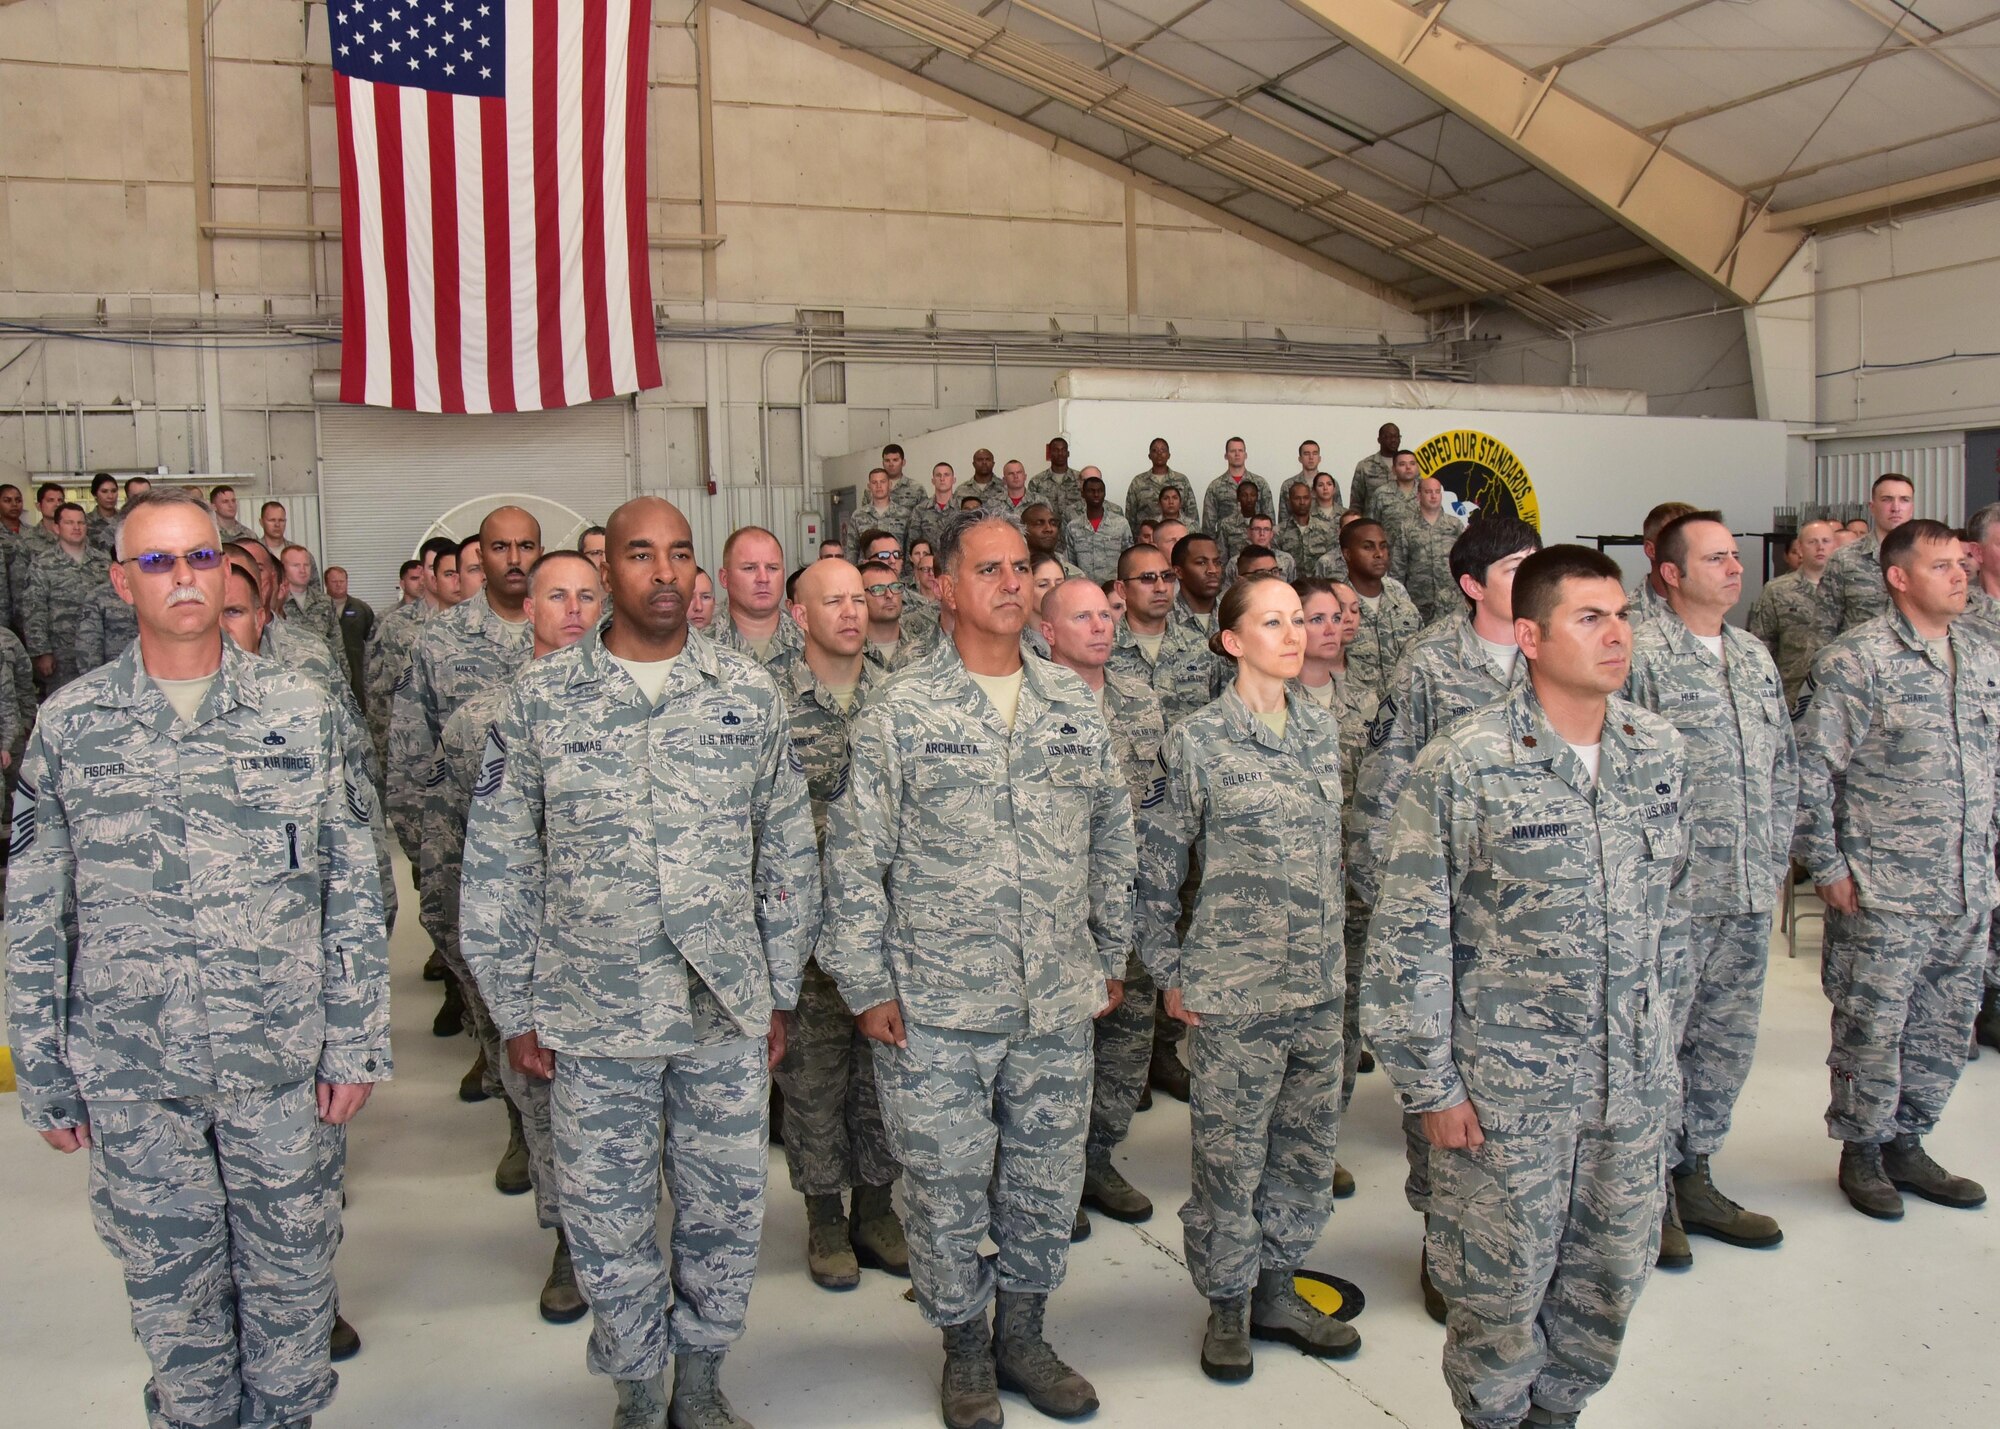 Airmen from the 924th Maintenance Squadron stand at attention July 9 during a change of command ceremony held on Davis-Monthan Air Force Base, Ariz. Lt. Col. Collin Shelton relinquished command to Maj. Bobby Cheek who took over as the new 924 MXS commander. Shelton’s new position and duty title will be the 924th Fighter Group deputy commander. Cheek has been with the 924th since May 2015 as the operations officer. Over 120 Airmen, family members, and guests attended the ceremony. (U.S. Air Force photo by Tech. Sgt. Louis Vega Jr.)